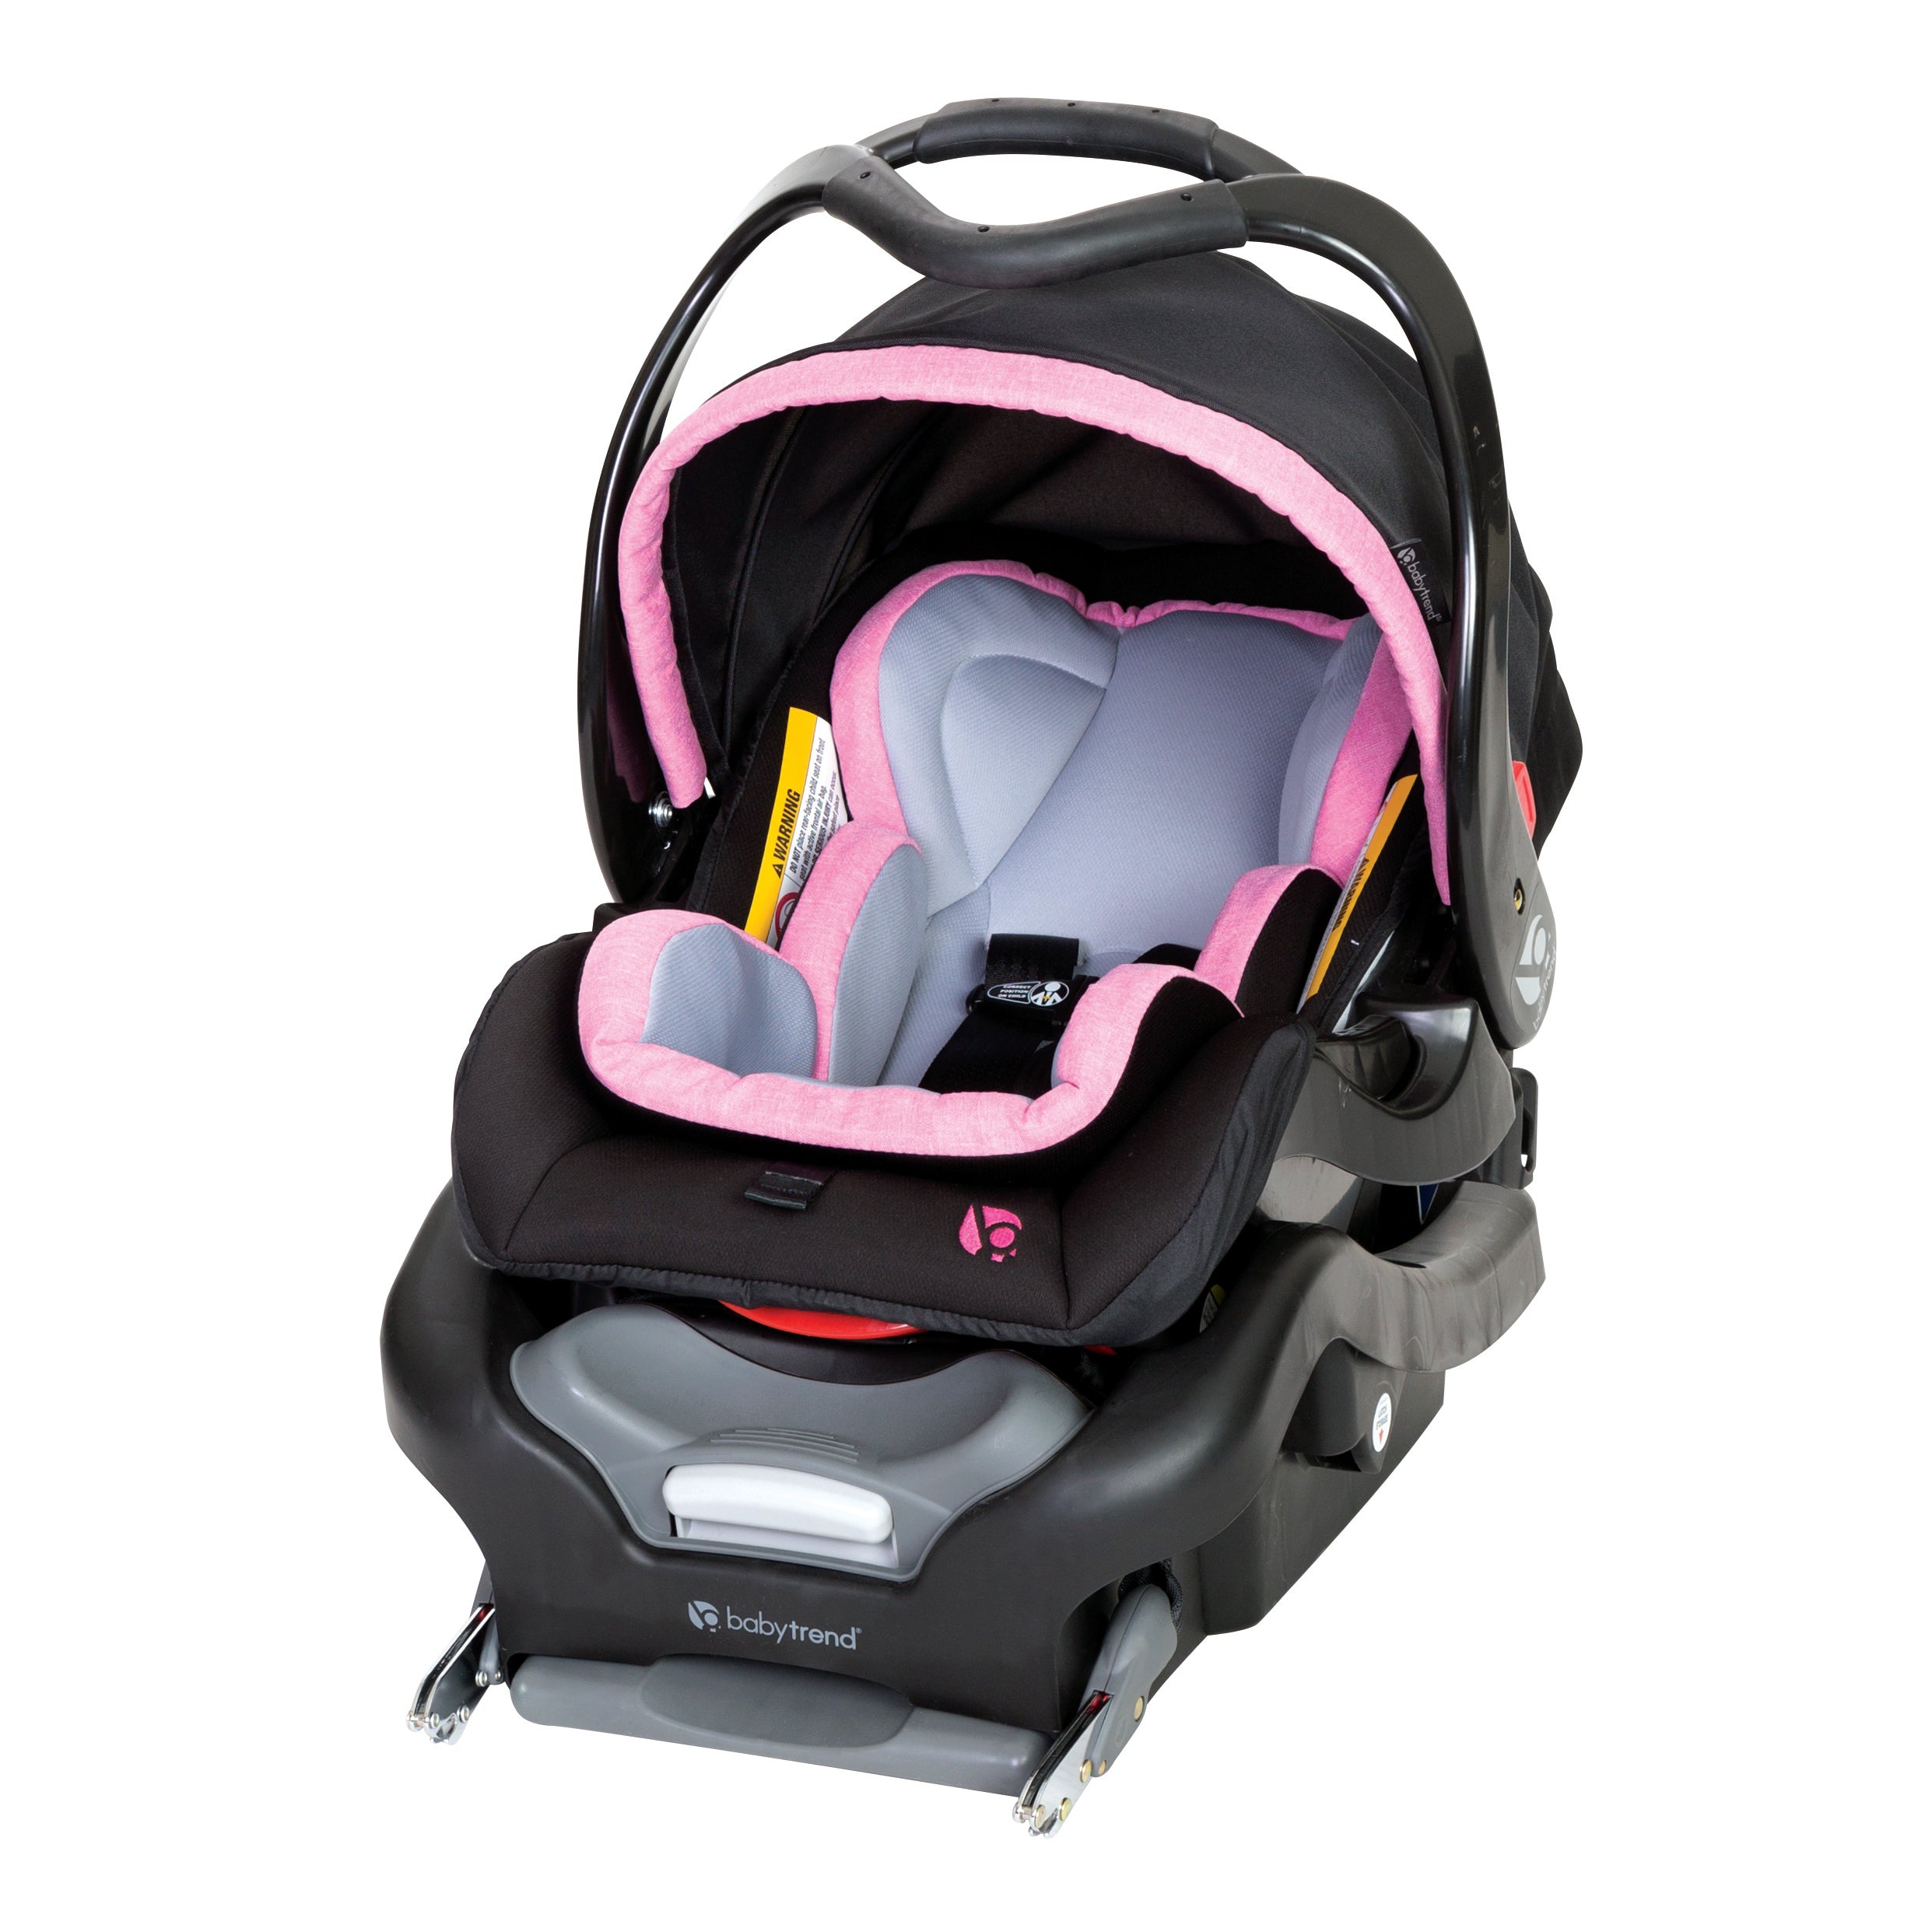 Secure Snap Tech 35 Infant Car Seat Pink Sorbet Baby Trend